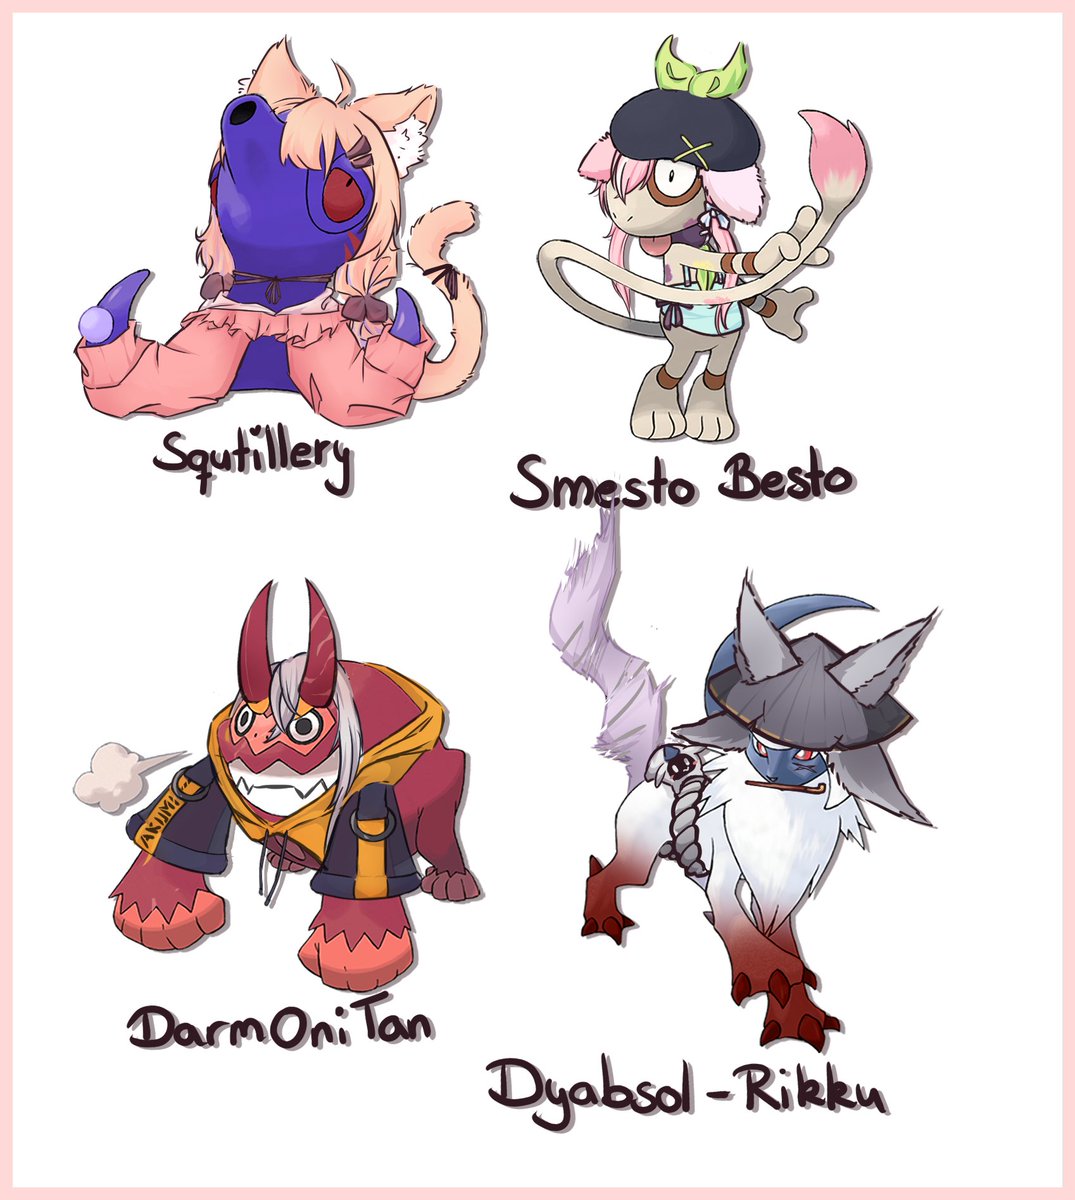 Scuffmon Gen 3, this time featuring part of VYUGEN
@SquChan as Squtillery
@yuniiho as Smesto Besto
@yoclesh as DarmOniTan
and @dyarikku as Dyabsol-Rikku!
Continuing to work myself through the list next week c:
Pls be gentle on my scuff-mons <3